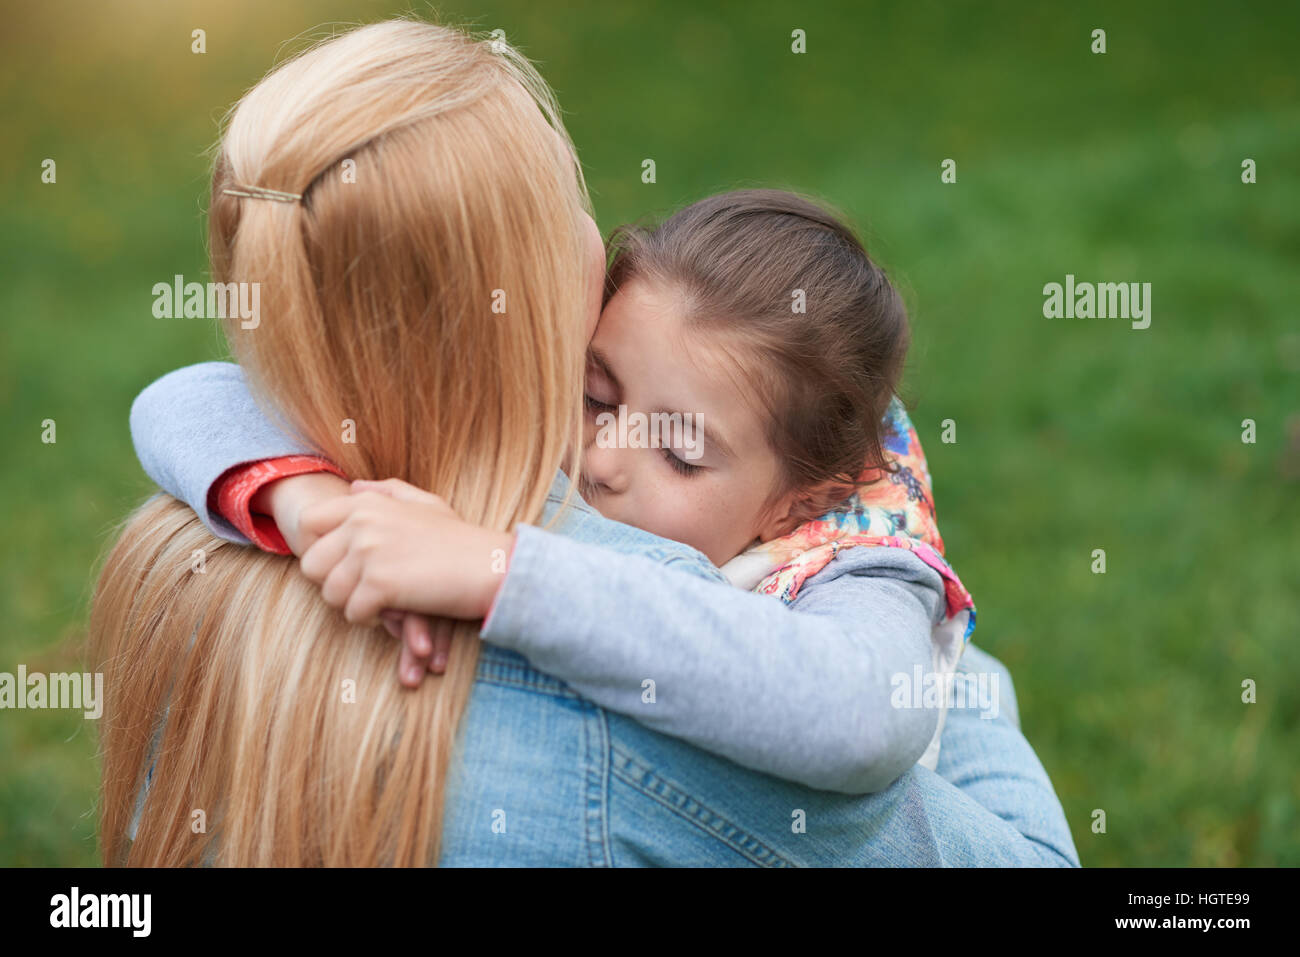 Bond between mother and daughter Stock Photo